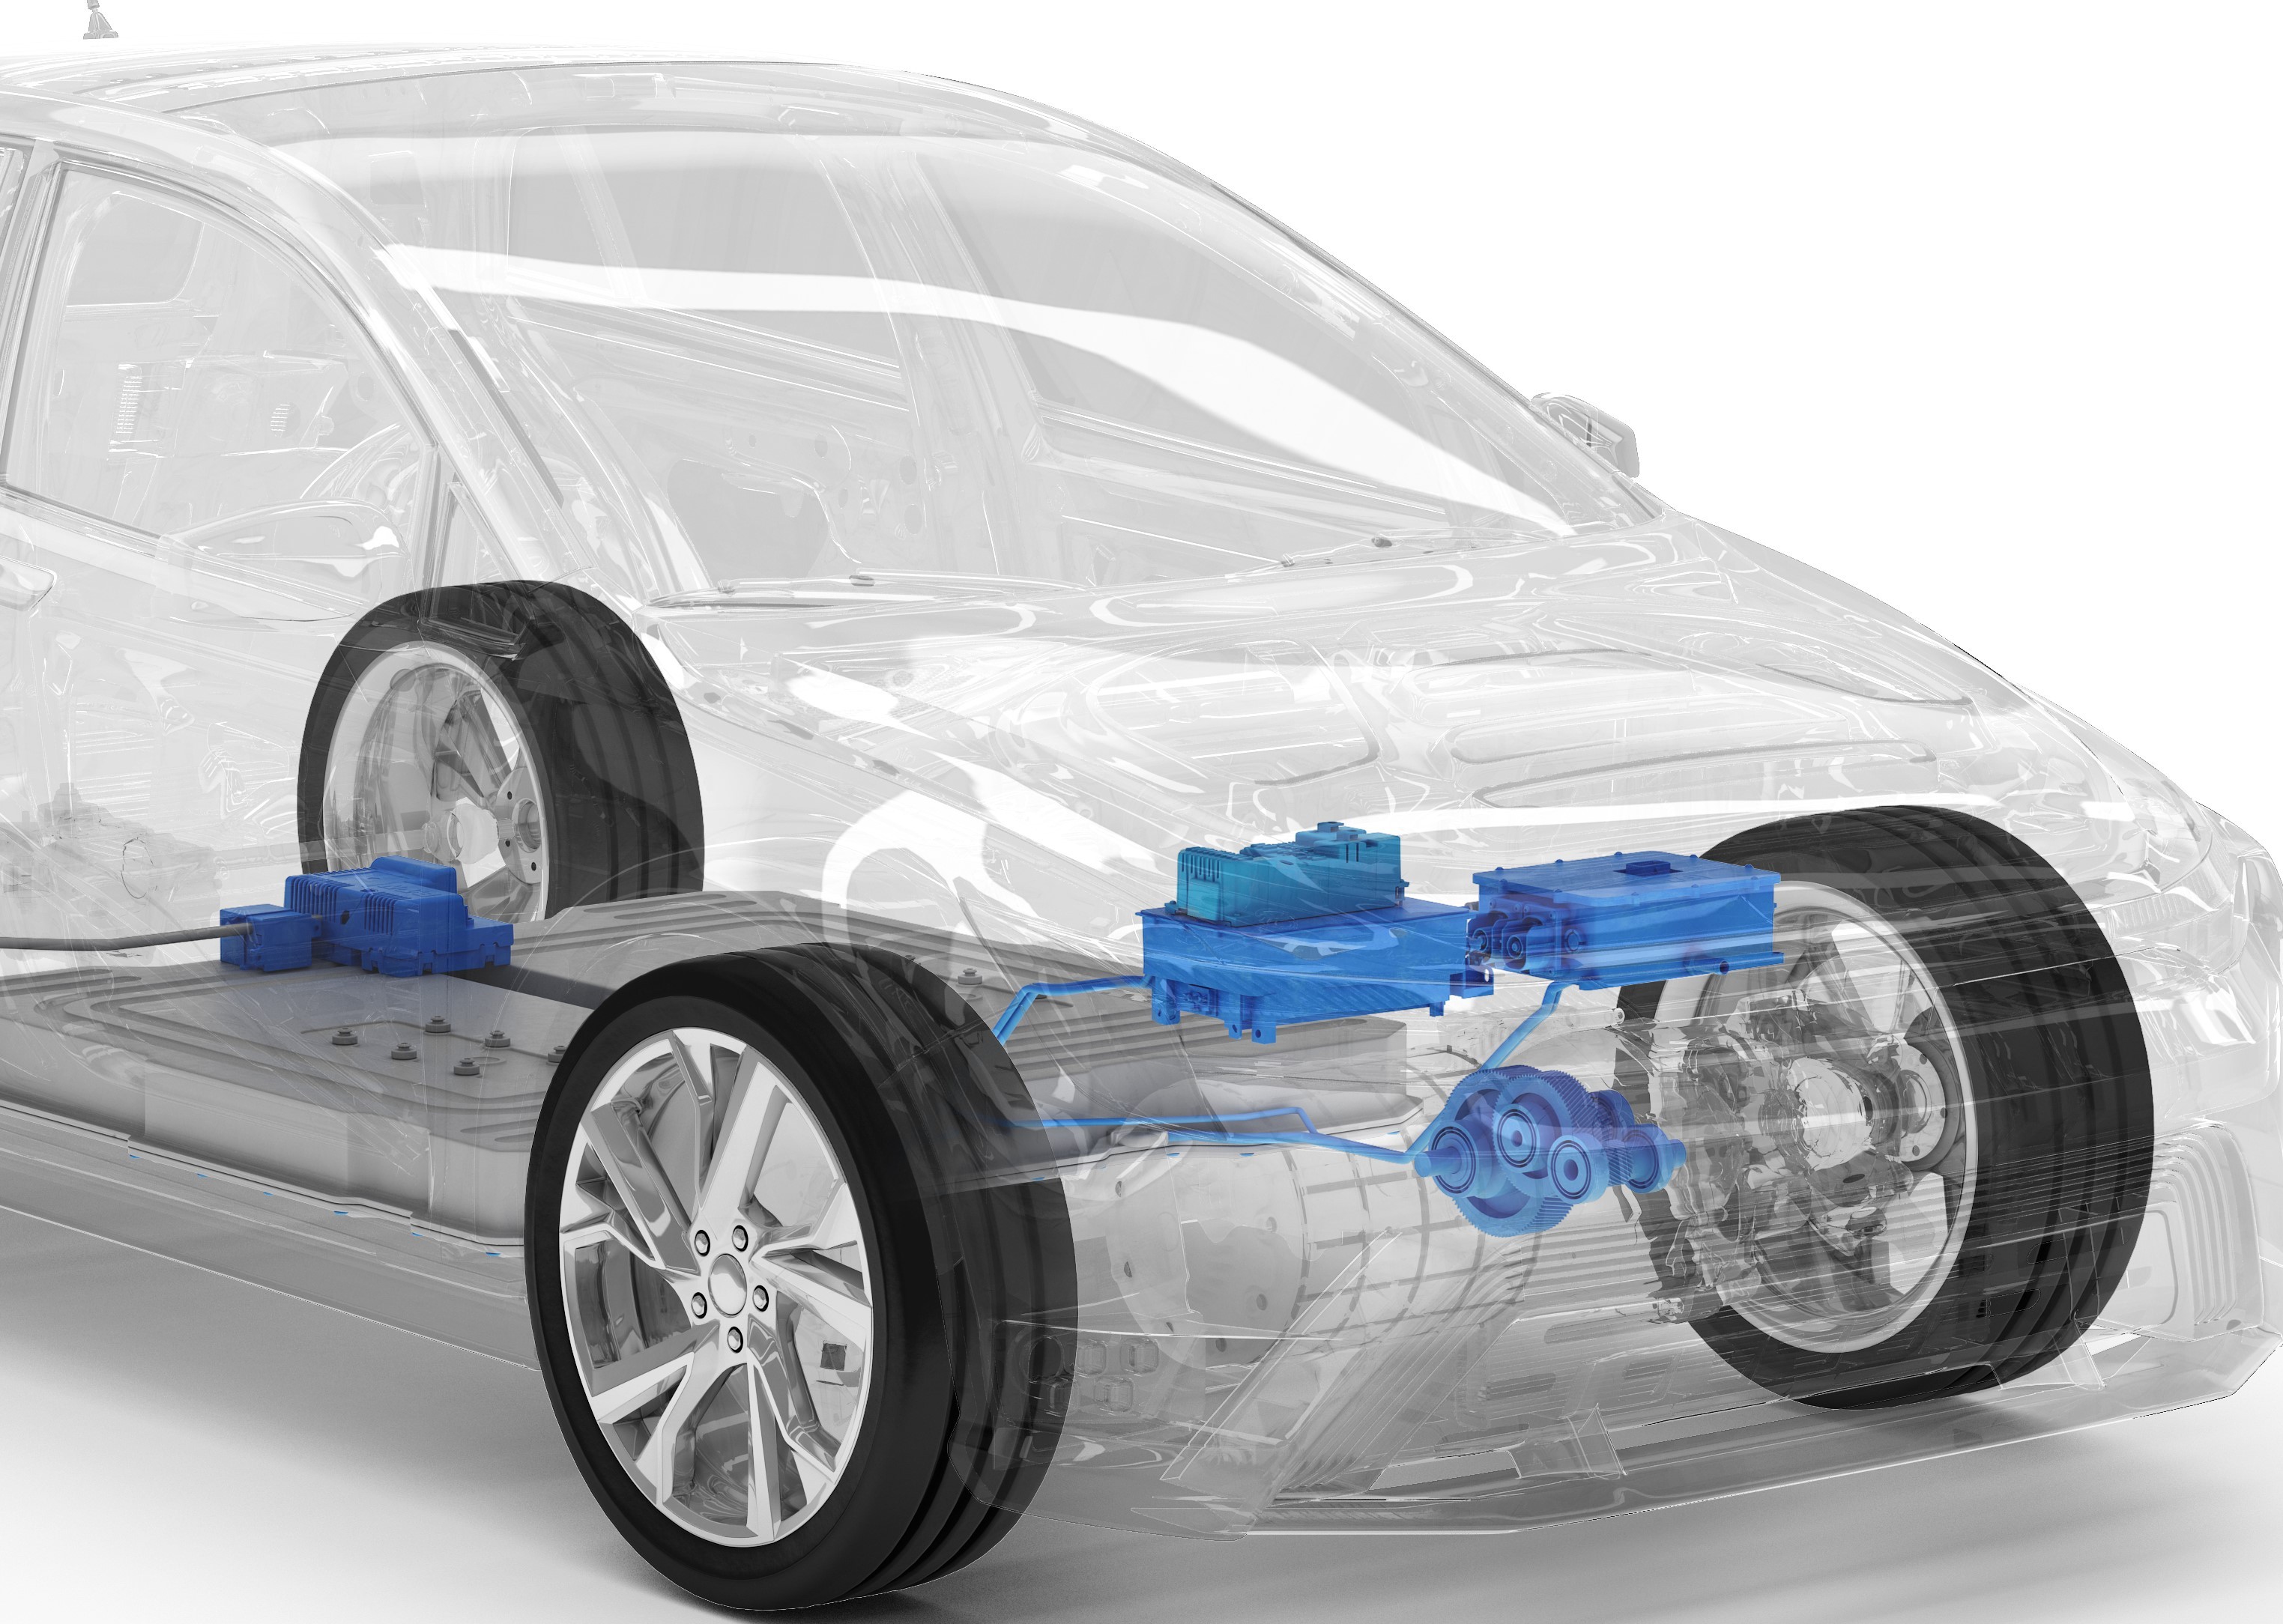 Eaton’s Vehicle Group Launches Electric Vehicle EDrive Gearing Design